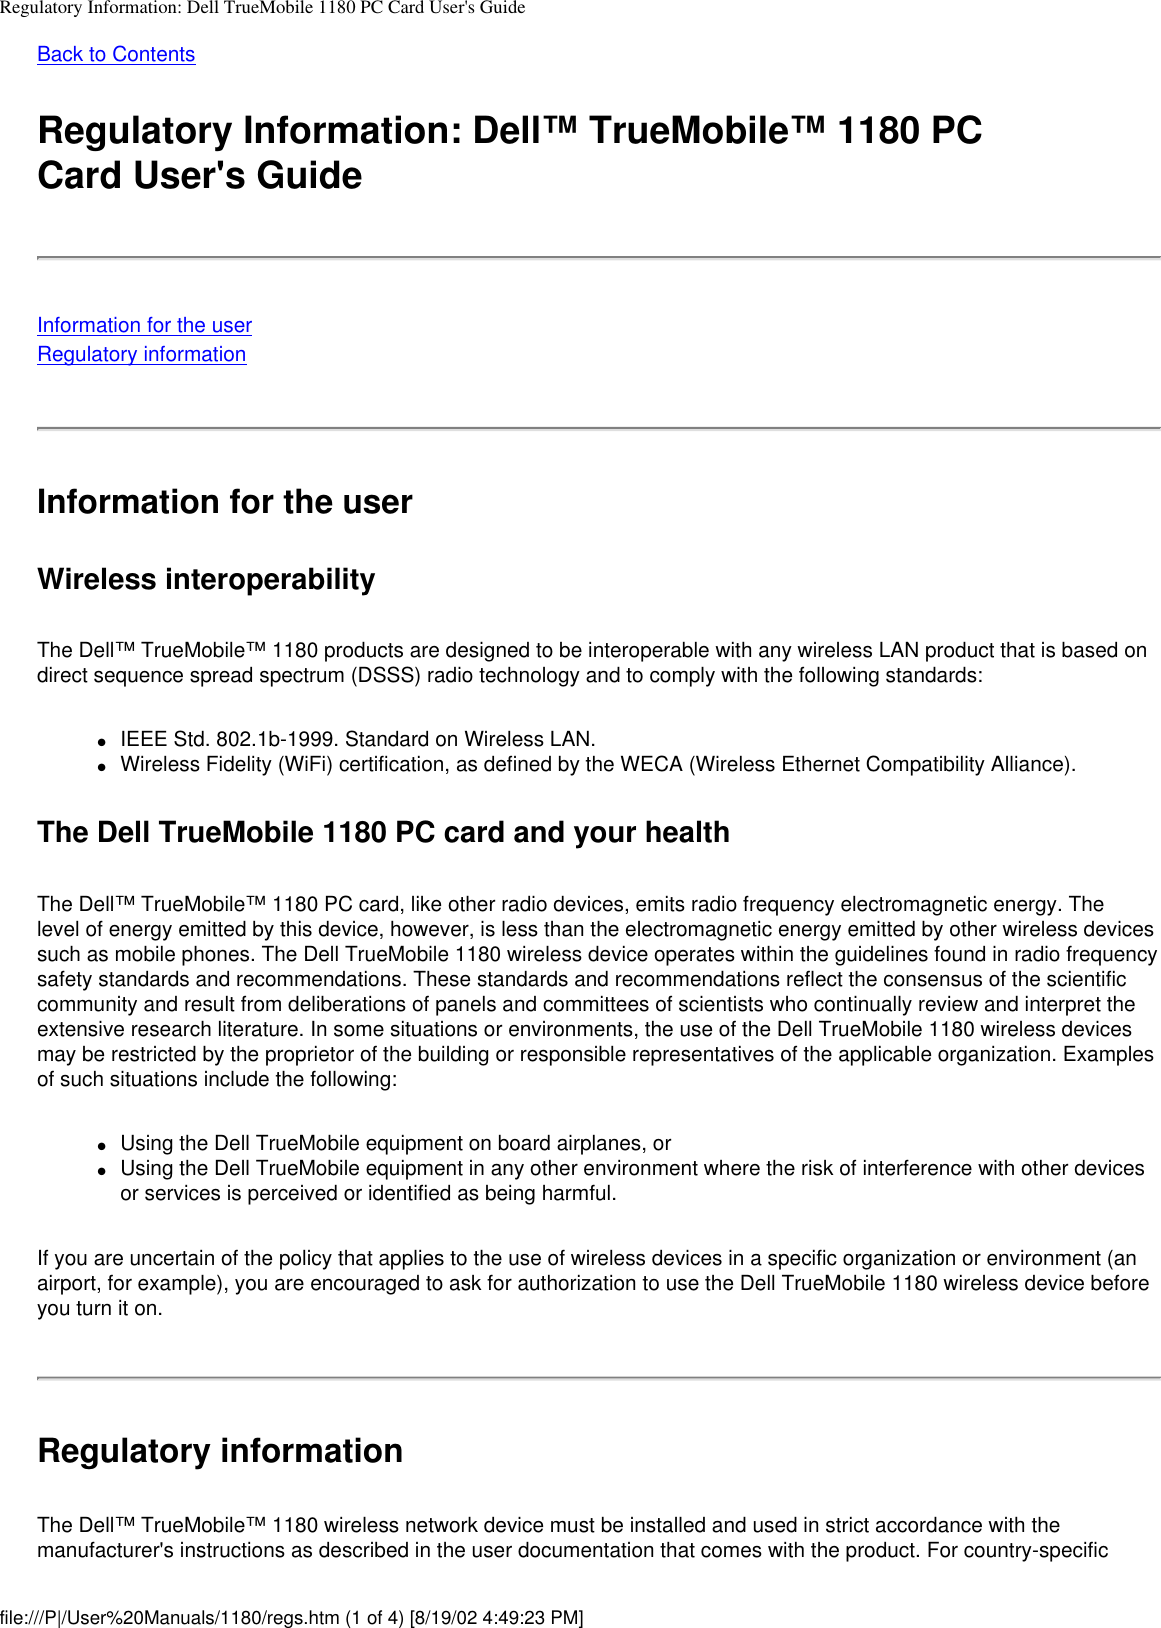 Regulatory Information: Dell TrueMobile 1180 PC Card User&apos;s GuideBack to ContentsRegulatory Information: Dell™ TrueMobile™ 1180 PCCard User&apos;s GuideInformation for the userRegulatory informationInformation for the userWireless interoperabilityThe Dell™ TrueMobile™ 1180 products are designed to be interoperable with any wireless LAN product that is based on direct sequence spread spectrum (DSSS) radio technology and to comply with the following standards:●     IEEE Std. 802.1b-1999. Standard on Wireless LAN.●     Wireless Fidelity (WiFi) certification, as defined by the WECA (Wireless Ethernet Compatibility Alliance).The Dell TrueMobile 1180 PC card and your healthThe Dell™ TrueMobile™ 1180 PC card, like other radio devices, emits radio frequency electromagnetic energy. The level of energy emitted by this device, however, is less than the electromagnetic energy emitted by other wireless devices such as mobile phones. The Dell TrueMobile 1180 wireless device operates within the guidelines found in radio frequency safety standards and recommendations. These standards and recommendations reflect the consensus of the scientific community and result from deliberations of panels and committees of scientists who continually review and interpret the extensive research literature. In some situations or environments, the use of the Dell TrueMobile 1180 wireless devices may be restricted by the proprietor of the building or responsible representatives of the applicable organization. Examples of such situations include the following:●     Using the Dell TrueMobile equipment on board airplanes, or●     Using the Dell TrueMobile equipment in any other environment where the risk of interference with other devices or services is perceived or identified as being harmful.If you are uncertain of the policy that applies to the use of wireless devices in a specific organization or environment (an airport, for example), you are encouraged to ask for authorization to use the Dell TrueMobile 1180 wireless device before you turn it on.Regulatory informationThe Dell™ TrueMobile™ 1180 wireless network device must be installed and used in strict accordance with the manufacturer&apos;s instructions as described in the user documentation that comes with the product. For country-specific file:///P|/User%20Manuals/1180/regs.htm (1 of 4) [8/19/02 4:49:23 PM]